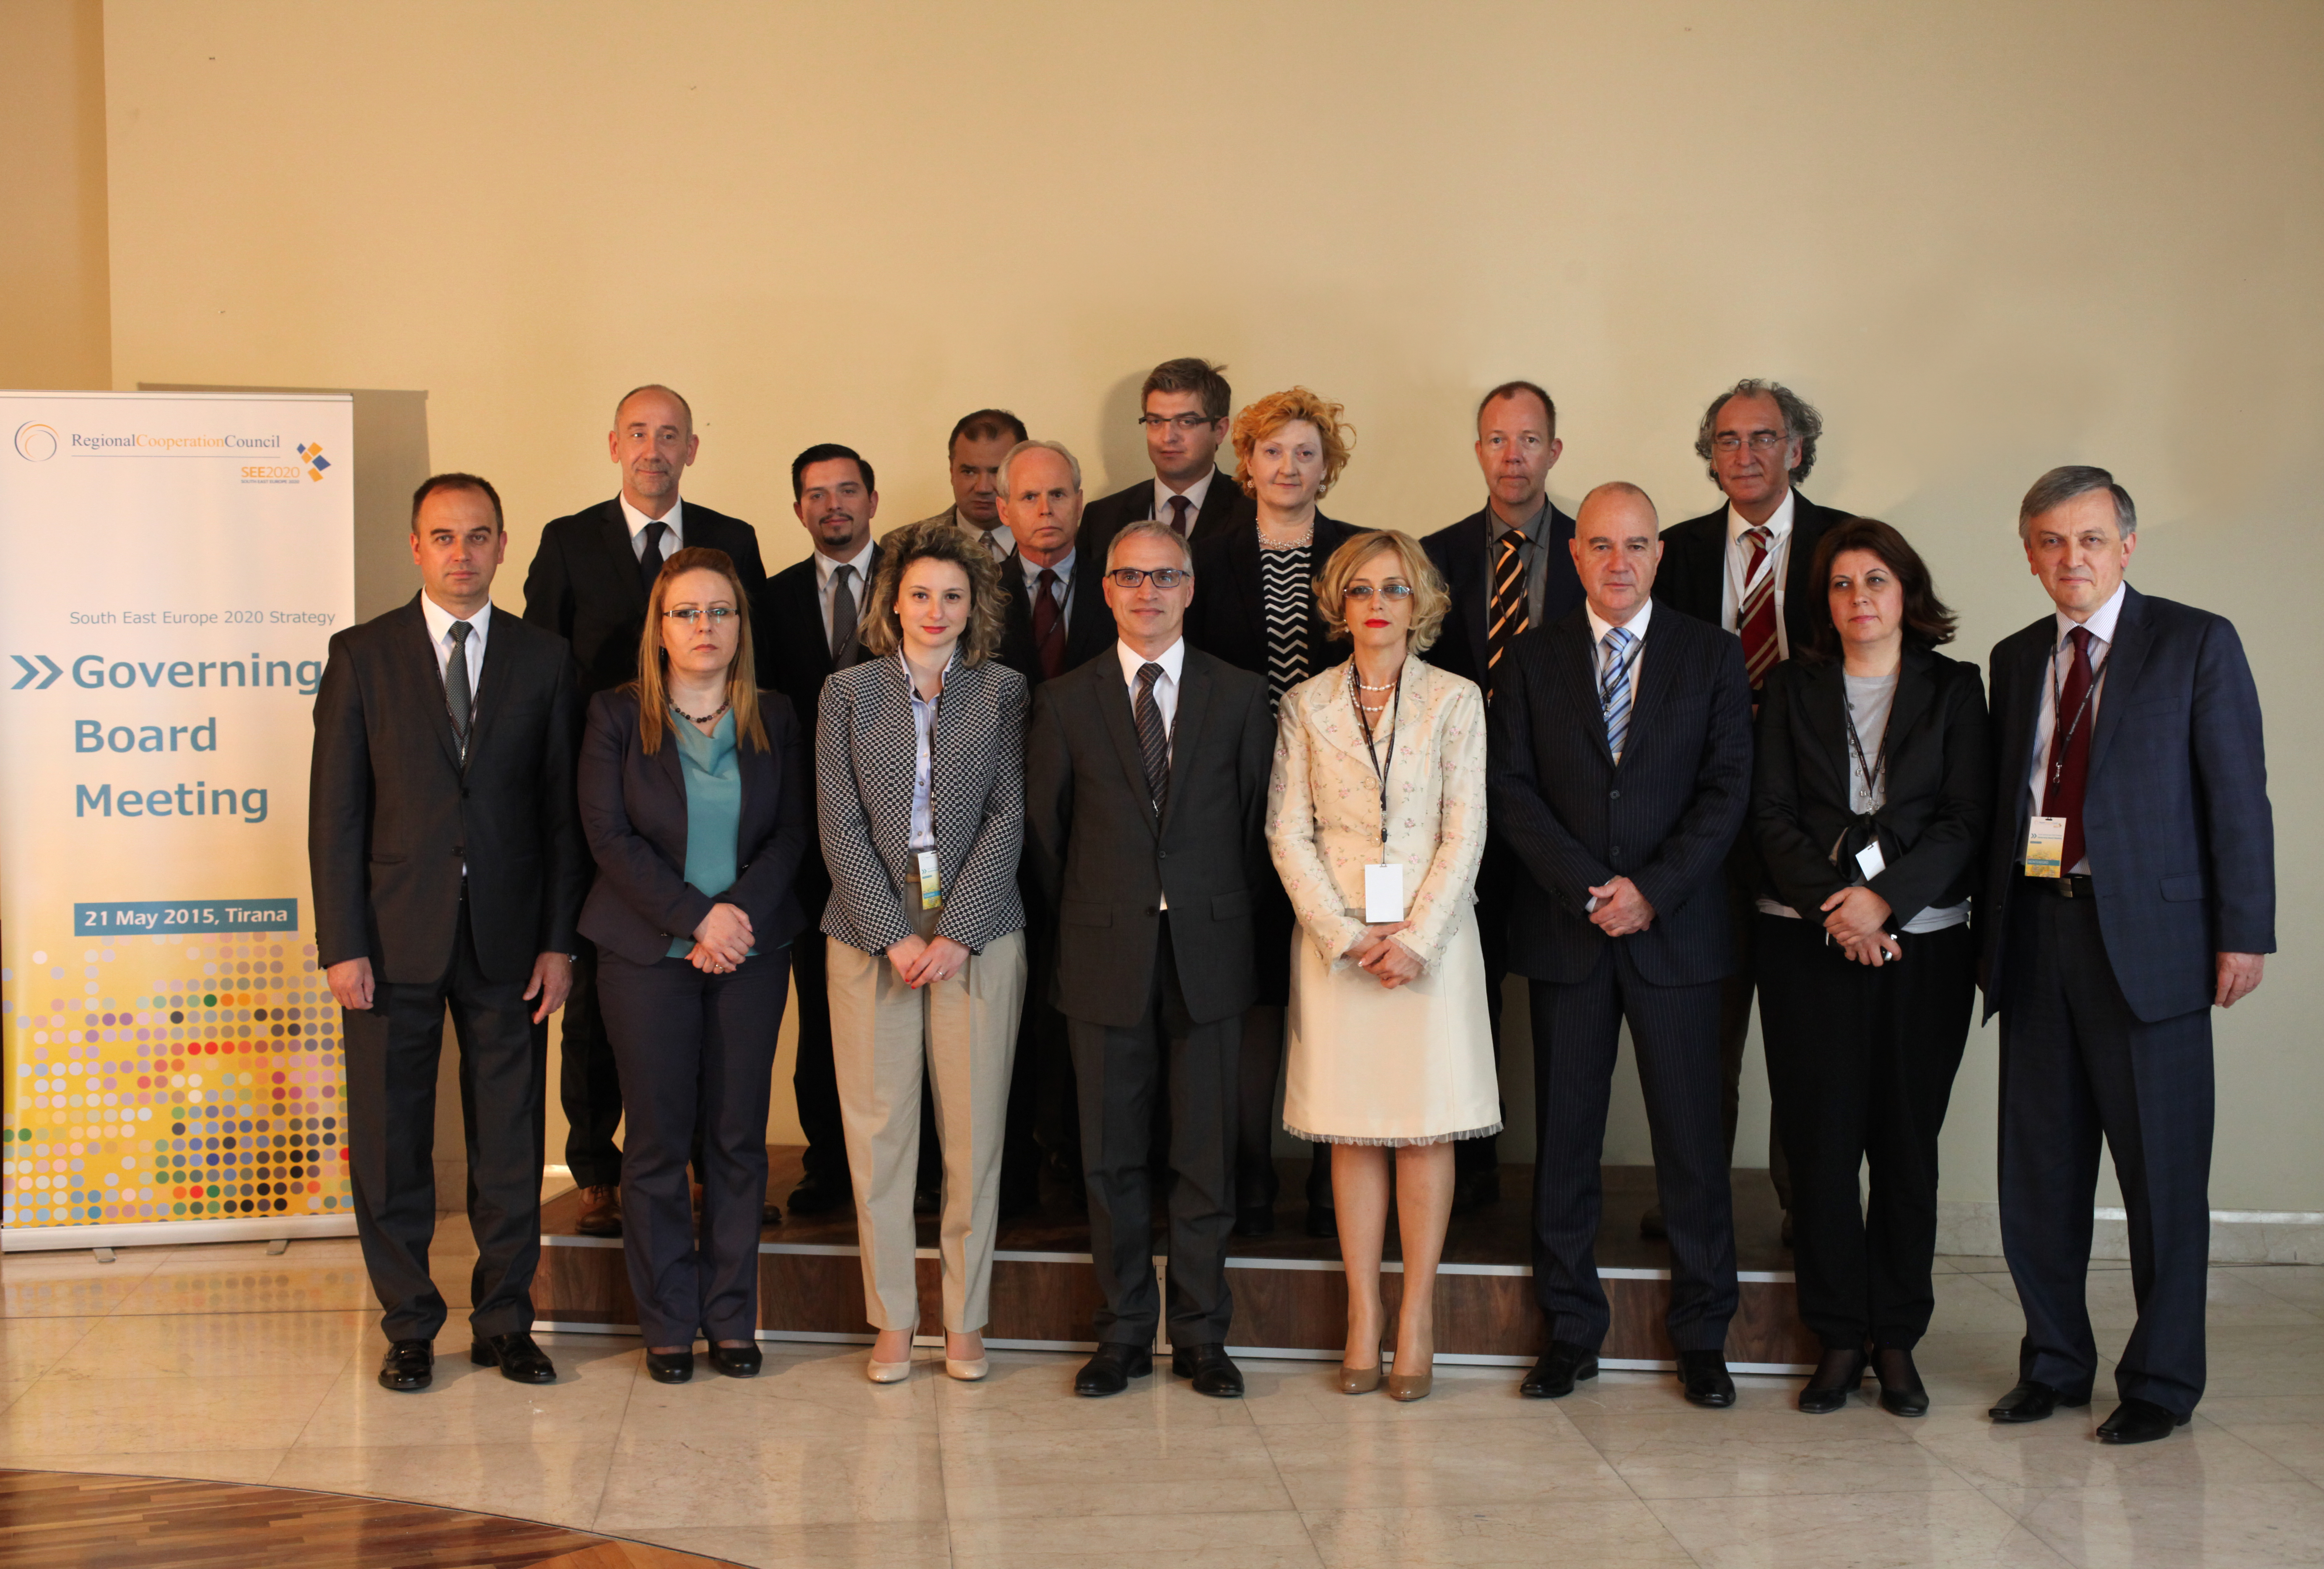 Participants of the second South East Europe 2020 Strategy (SEE 2020) Governing Board meeting, held on 21 May in Tirana, Albania. (Photo: RCC)